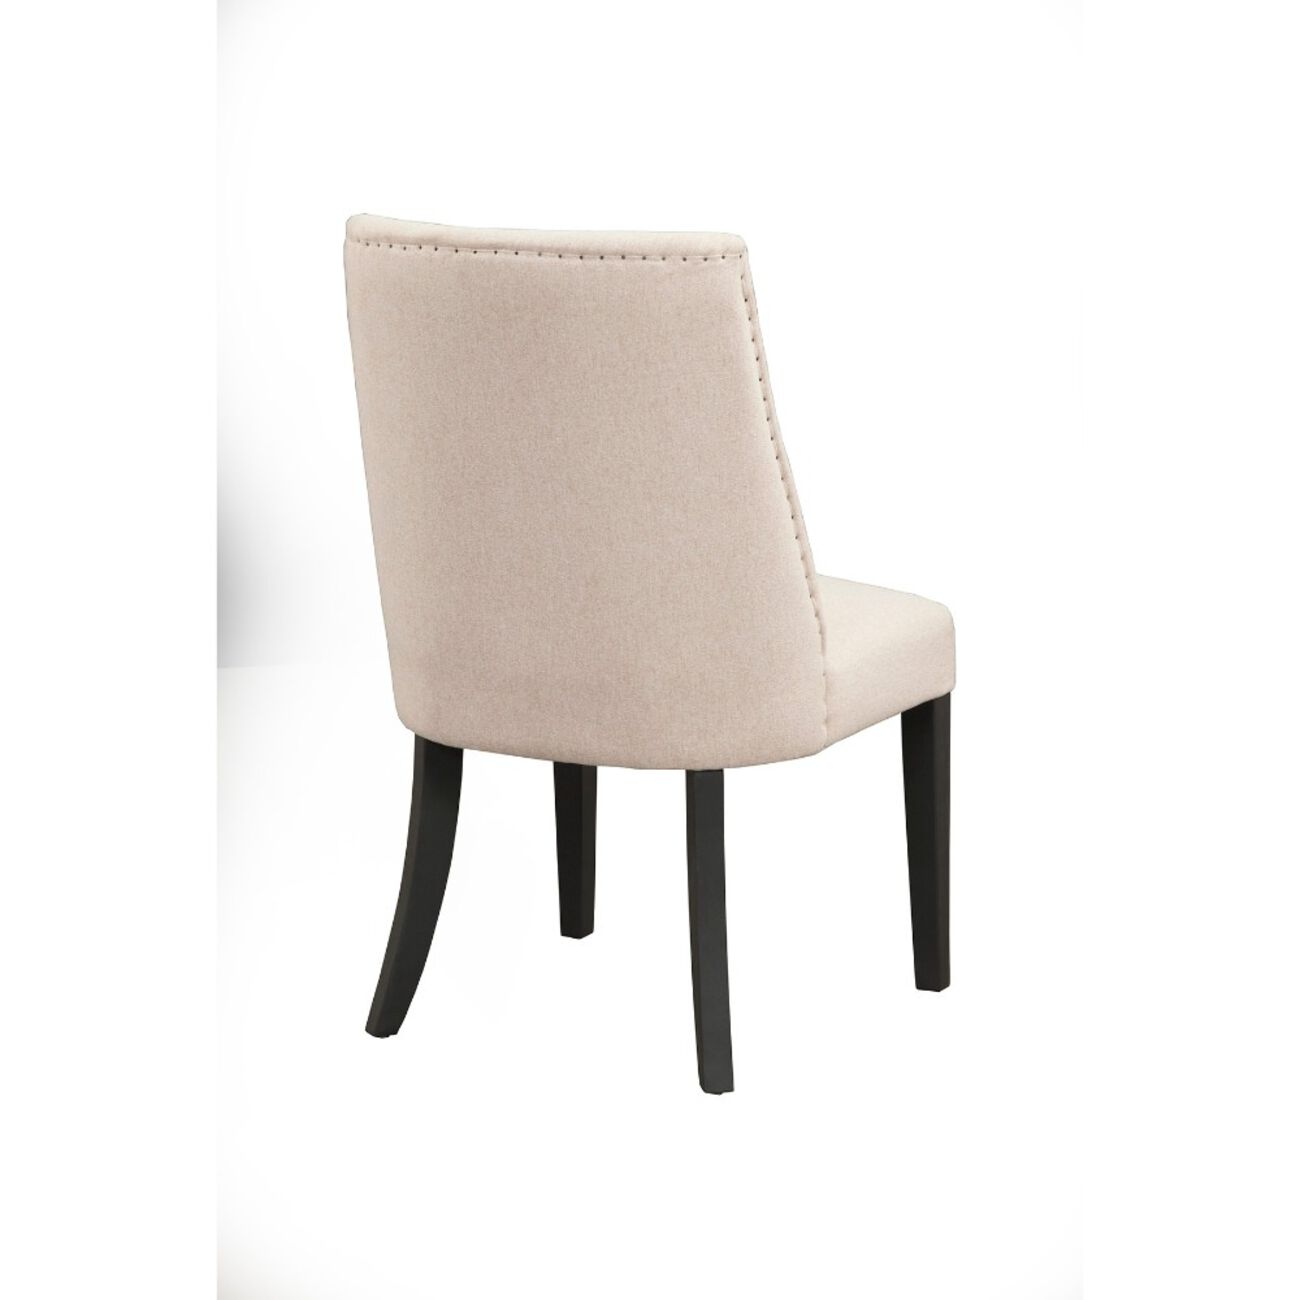 Fabric Upholstered Parson Chairs, Set Of 2, Cream And Black